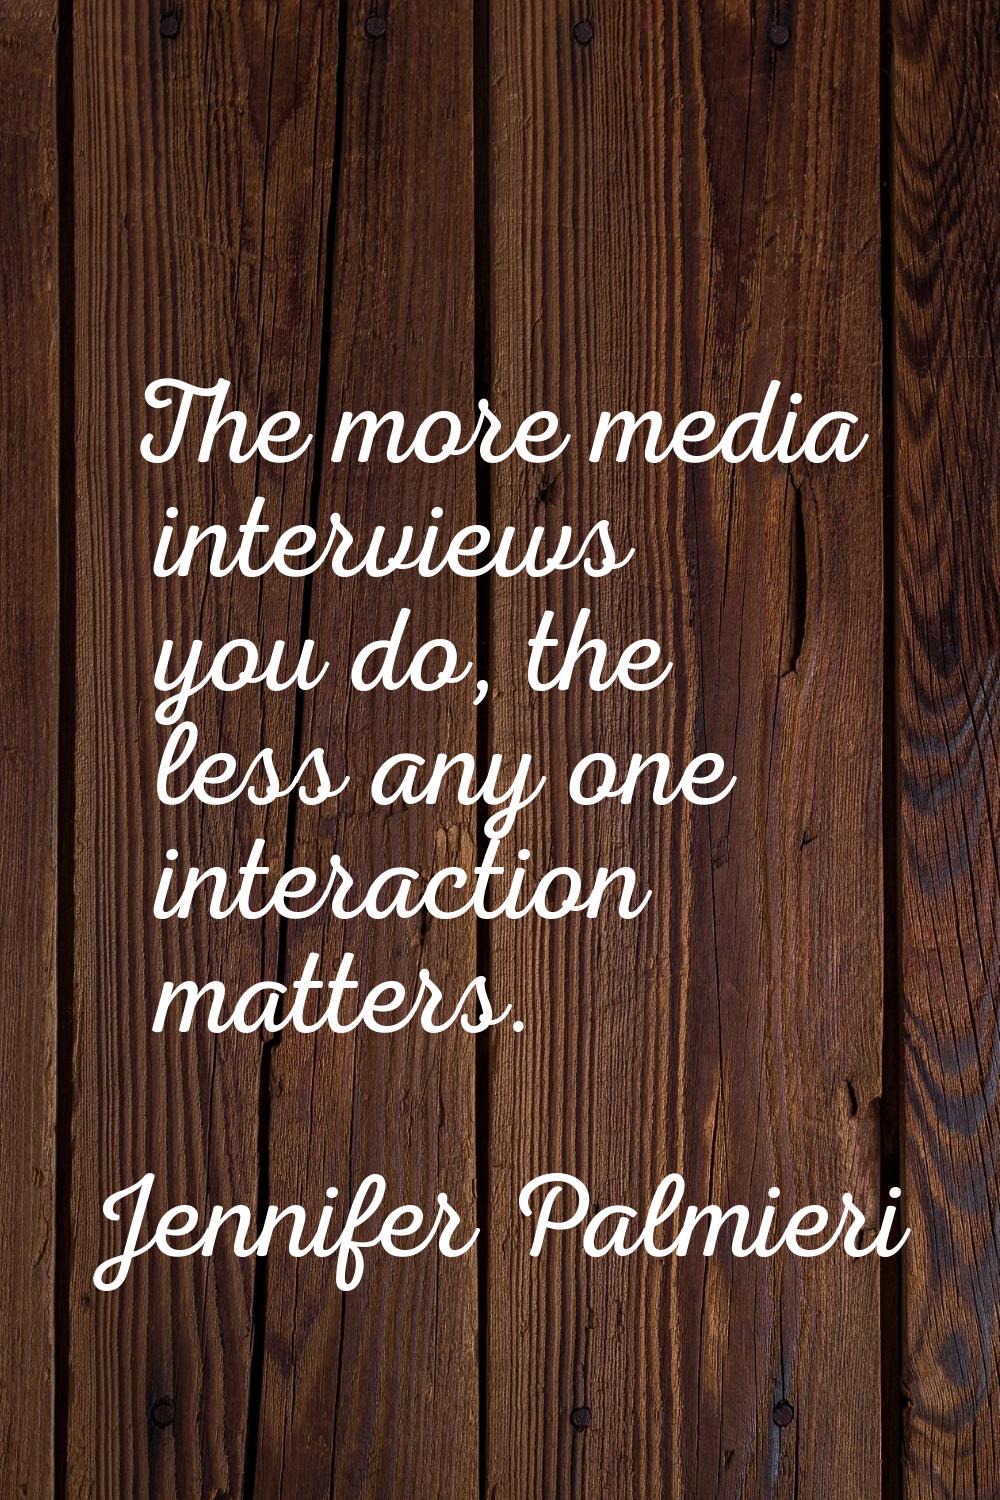 The more media interviews you do, the less any one interaction matters.